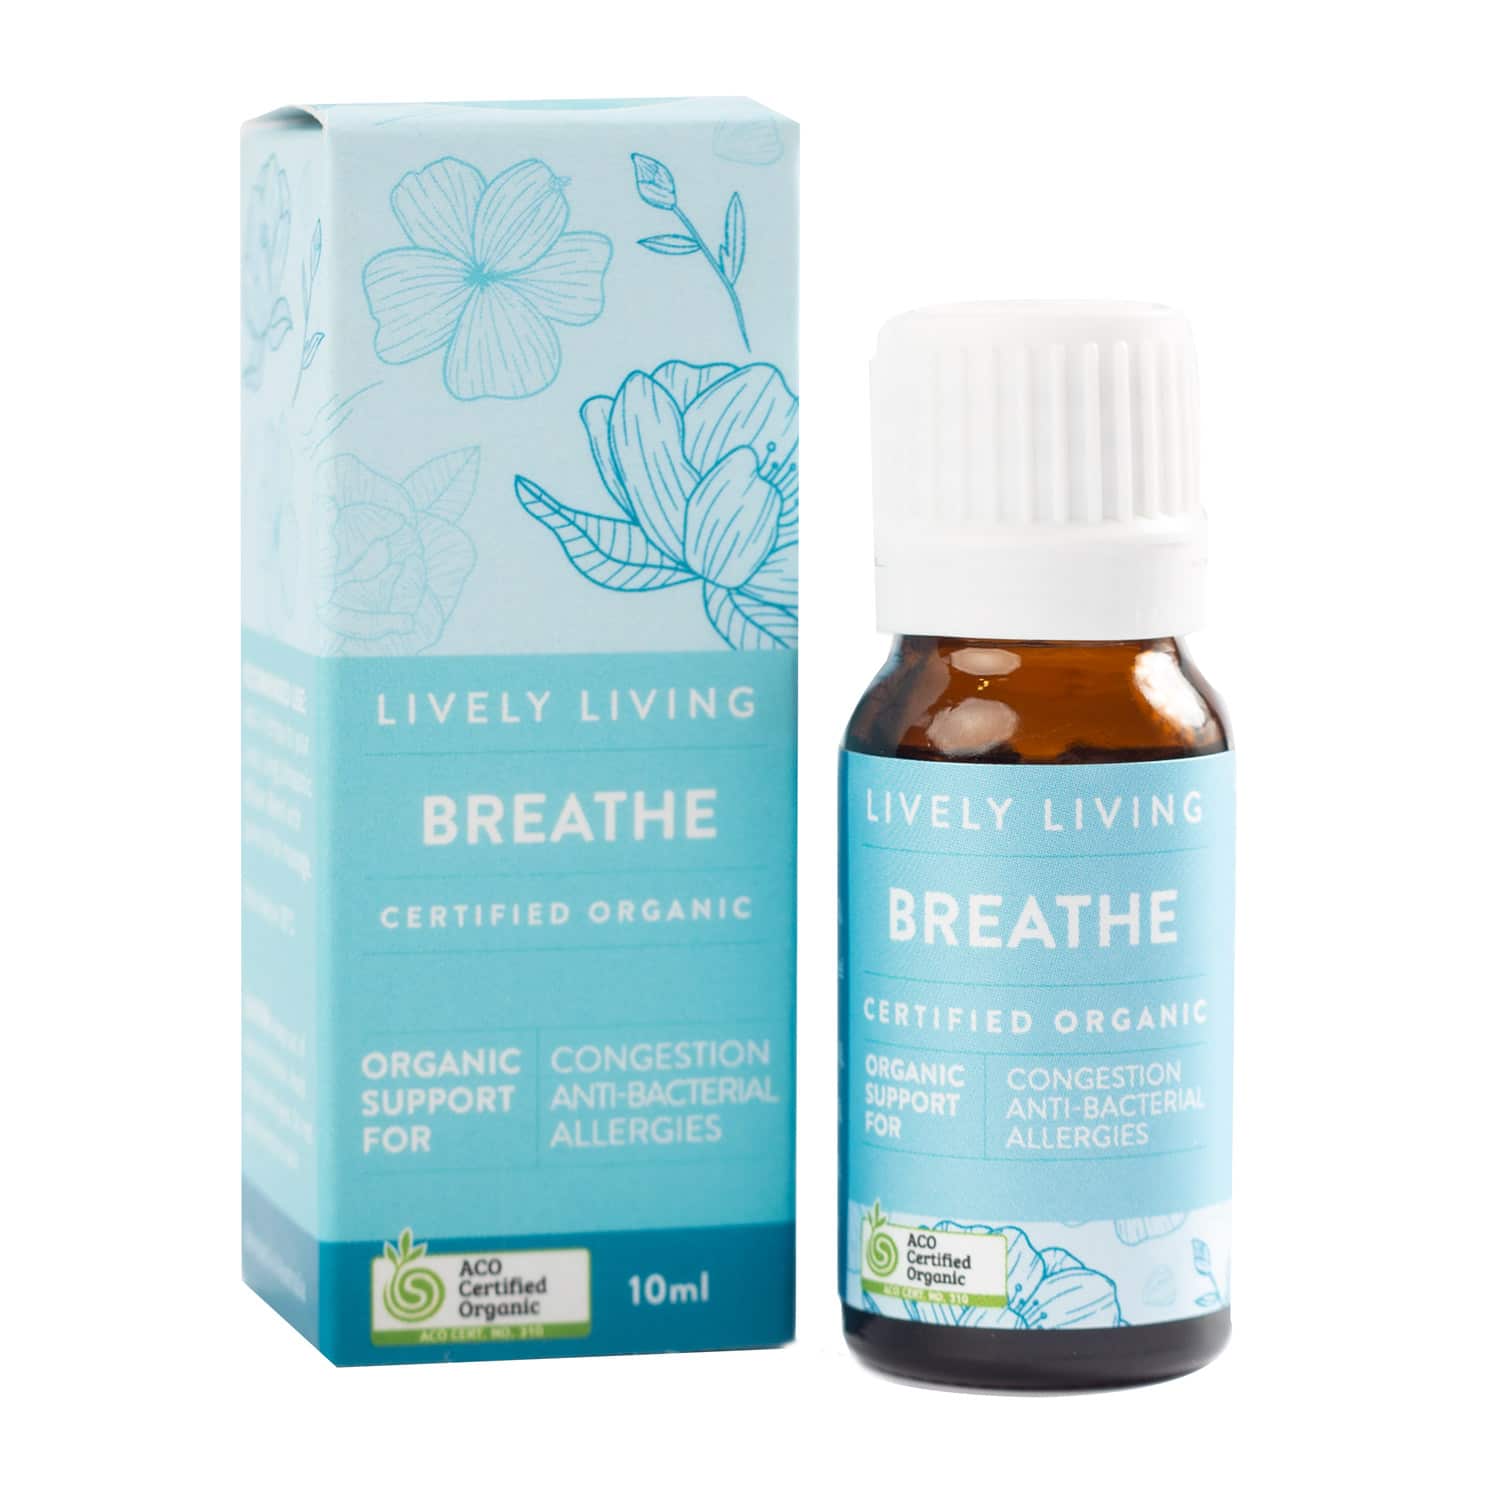 Part of the Lively Living Mother & Child Collection to support asthma, sinus issues, congestion and snoring.